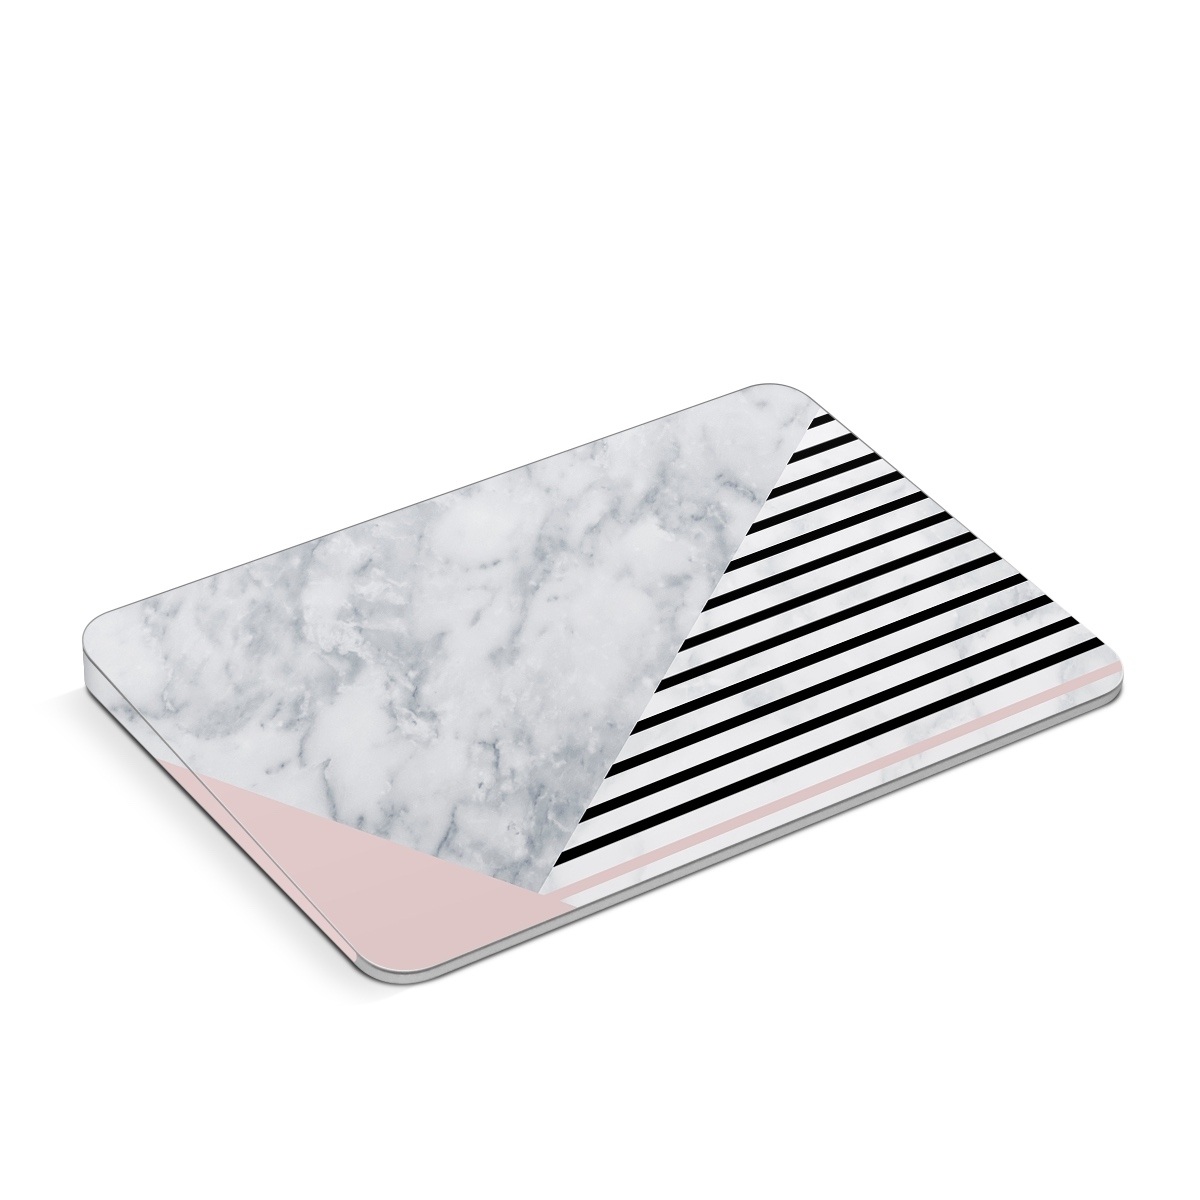 Apple Magic Trackpad Skin design of White, Line, Architecture, Stairs, Parallel, with gray, black, white, pink colors